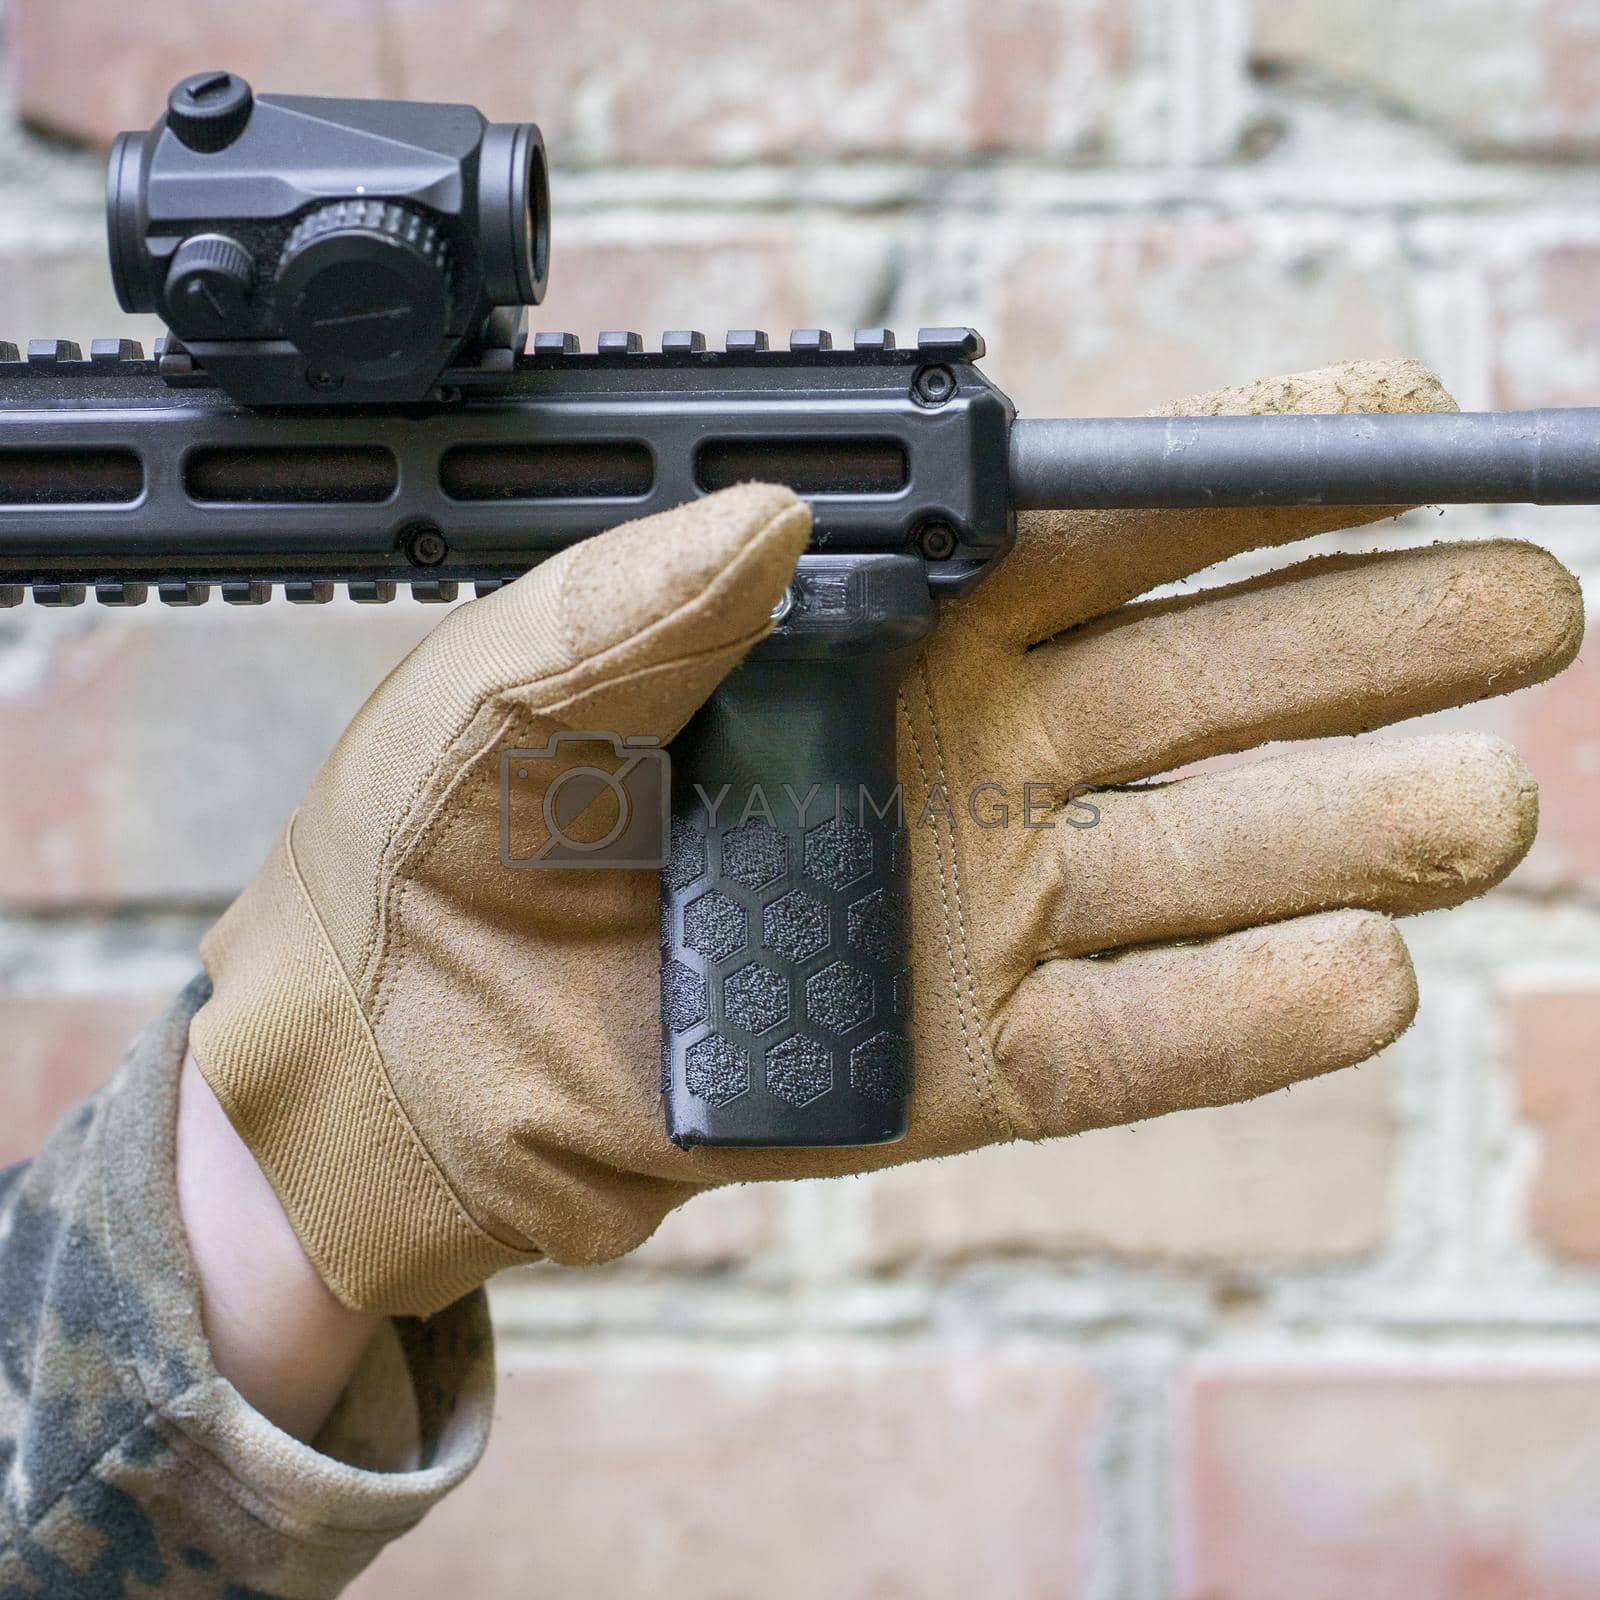 Royalty free image of man hand in tactical glove hold front grip for a shot gun. Handgun im man hand ready to use. Shooter man ready to hit the target holding a hand grip by LipikStockMedia